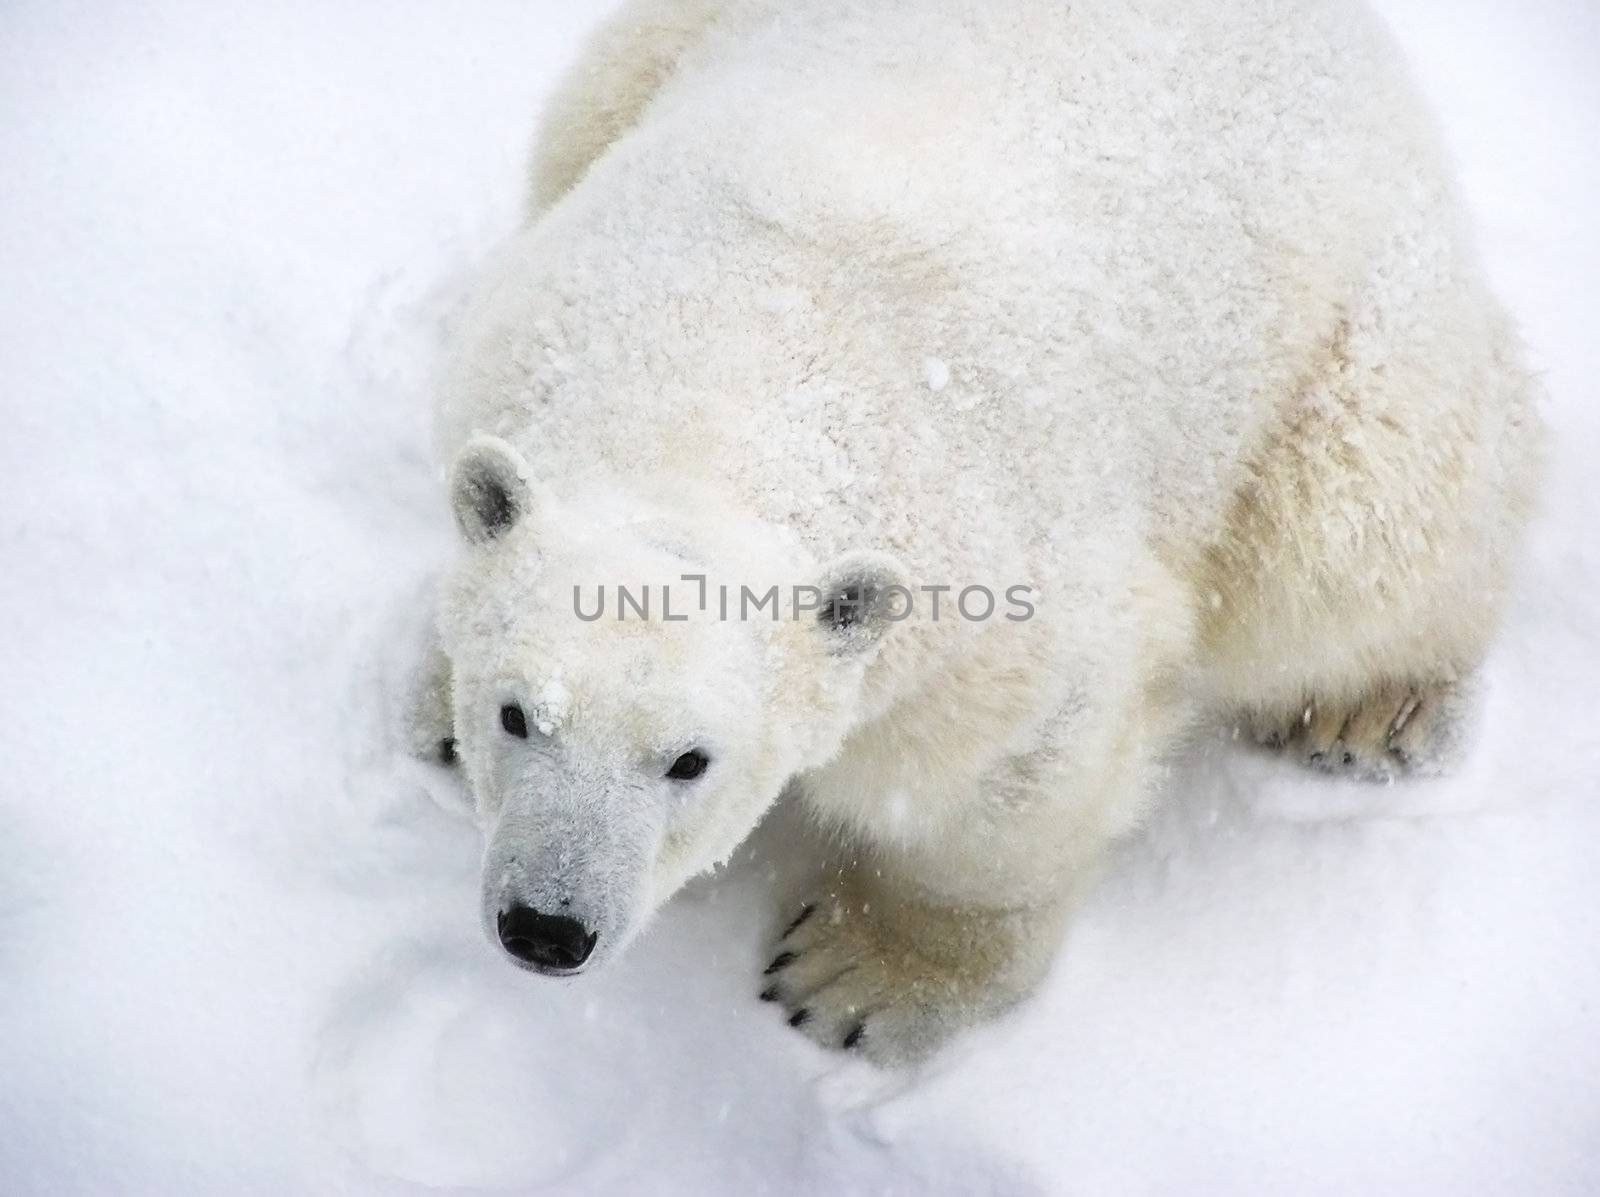 Polar bear coverred in heavy snow with footprints around it, looking up at camera.